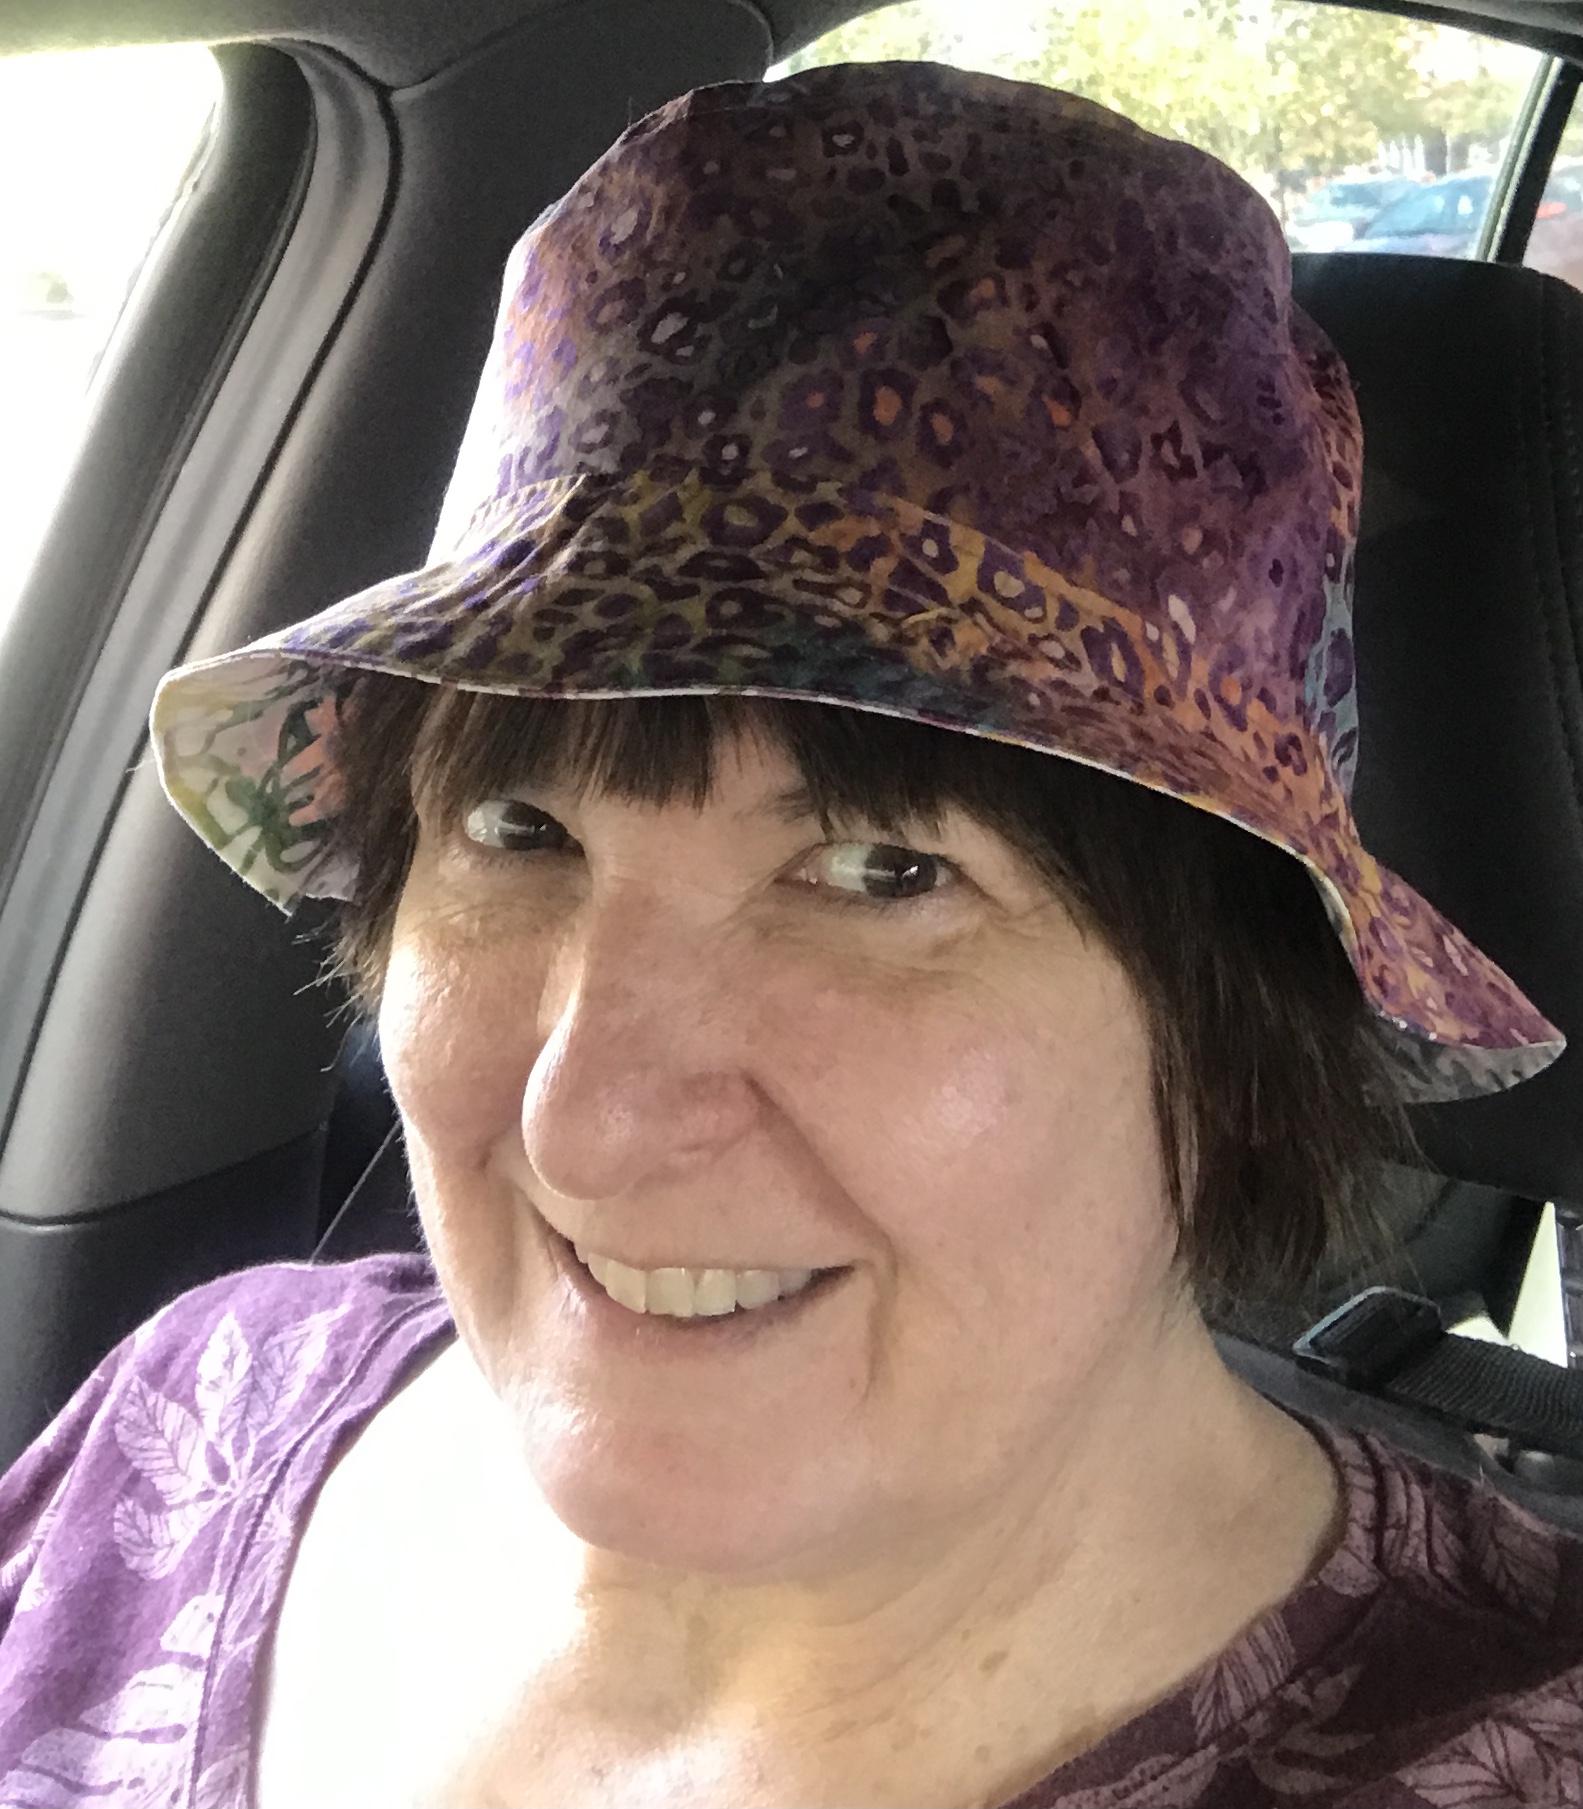 Example of same hat in different fabric on adult woman 